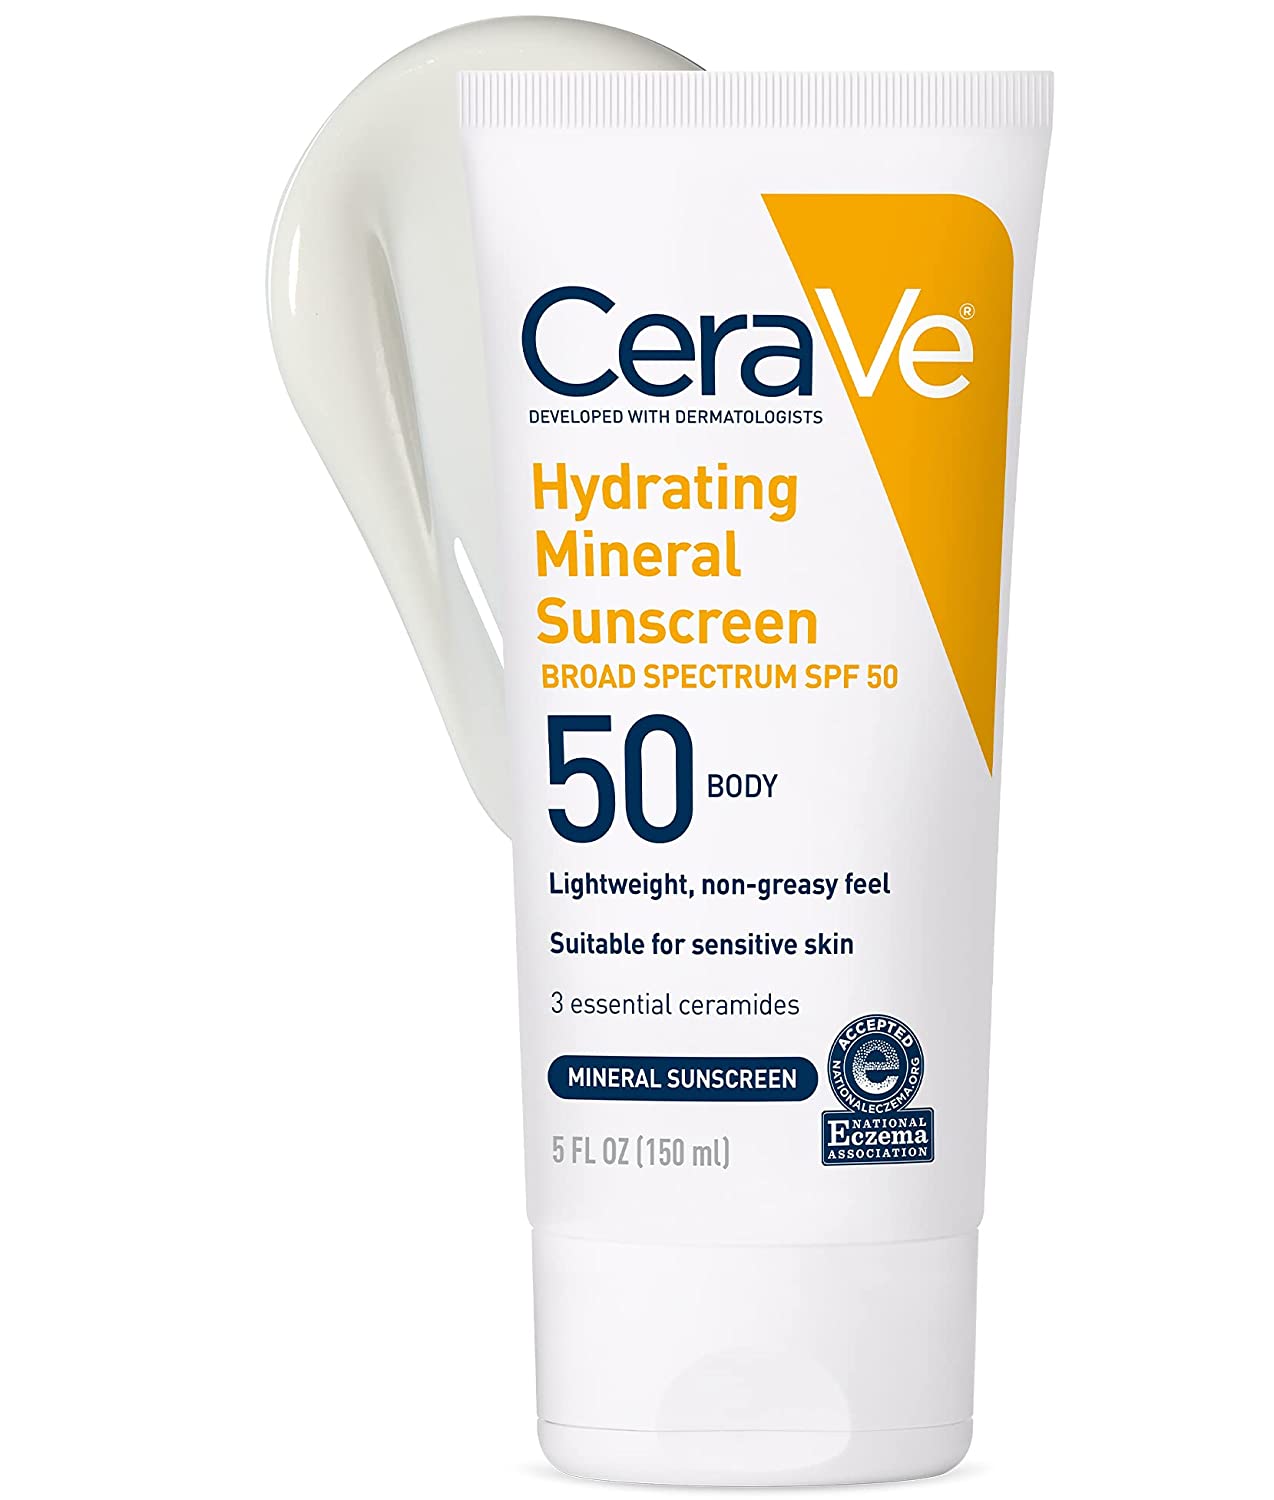 Cerave Hydrating Mineral Sunscreen SPF 50 Body Lotion